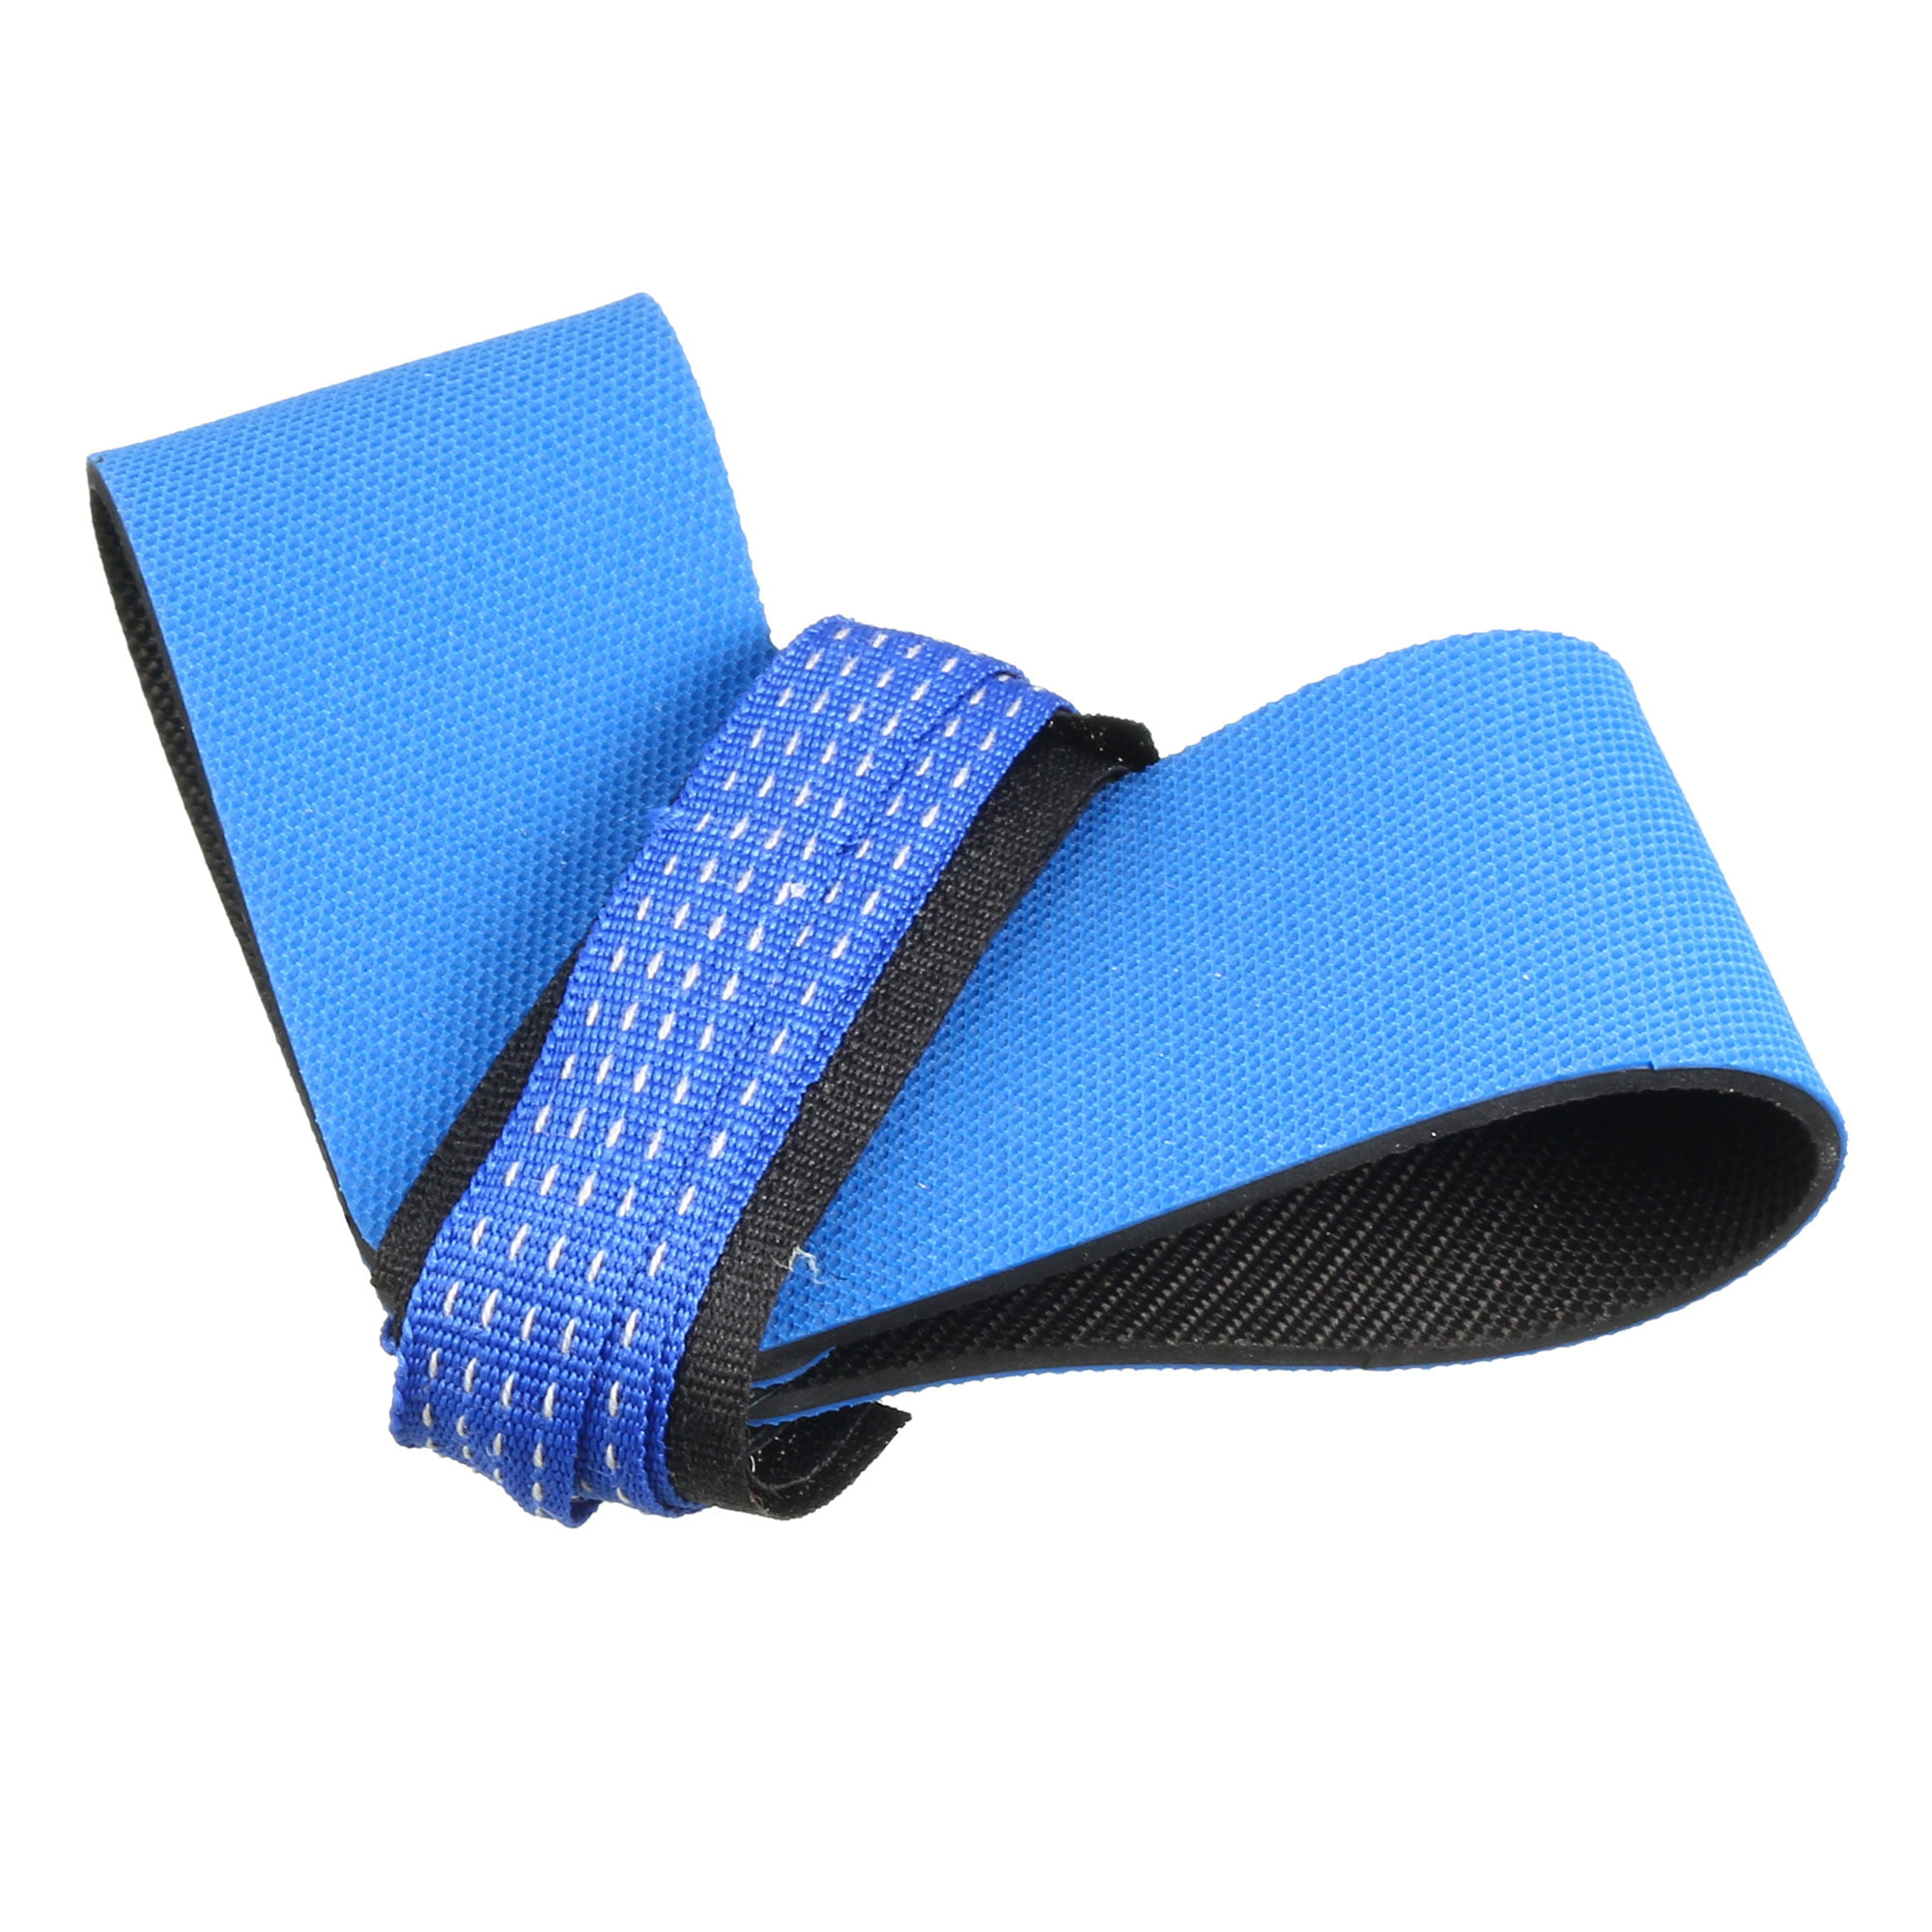 Buy > esd foot straps > in stock